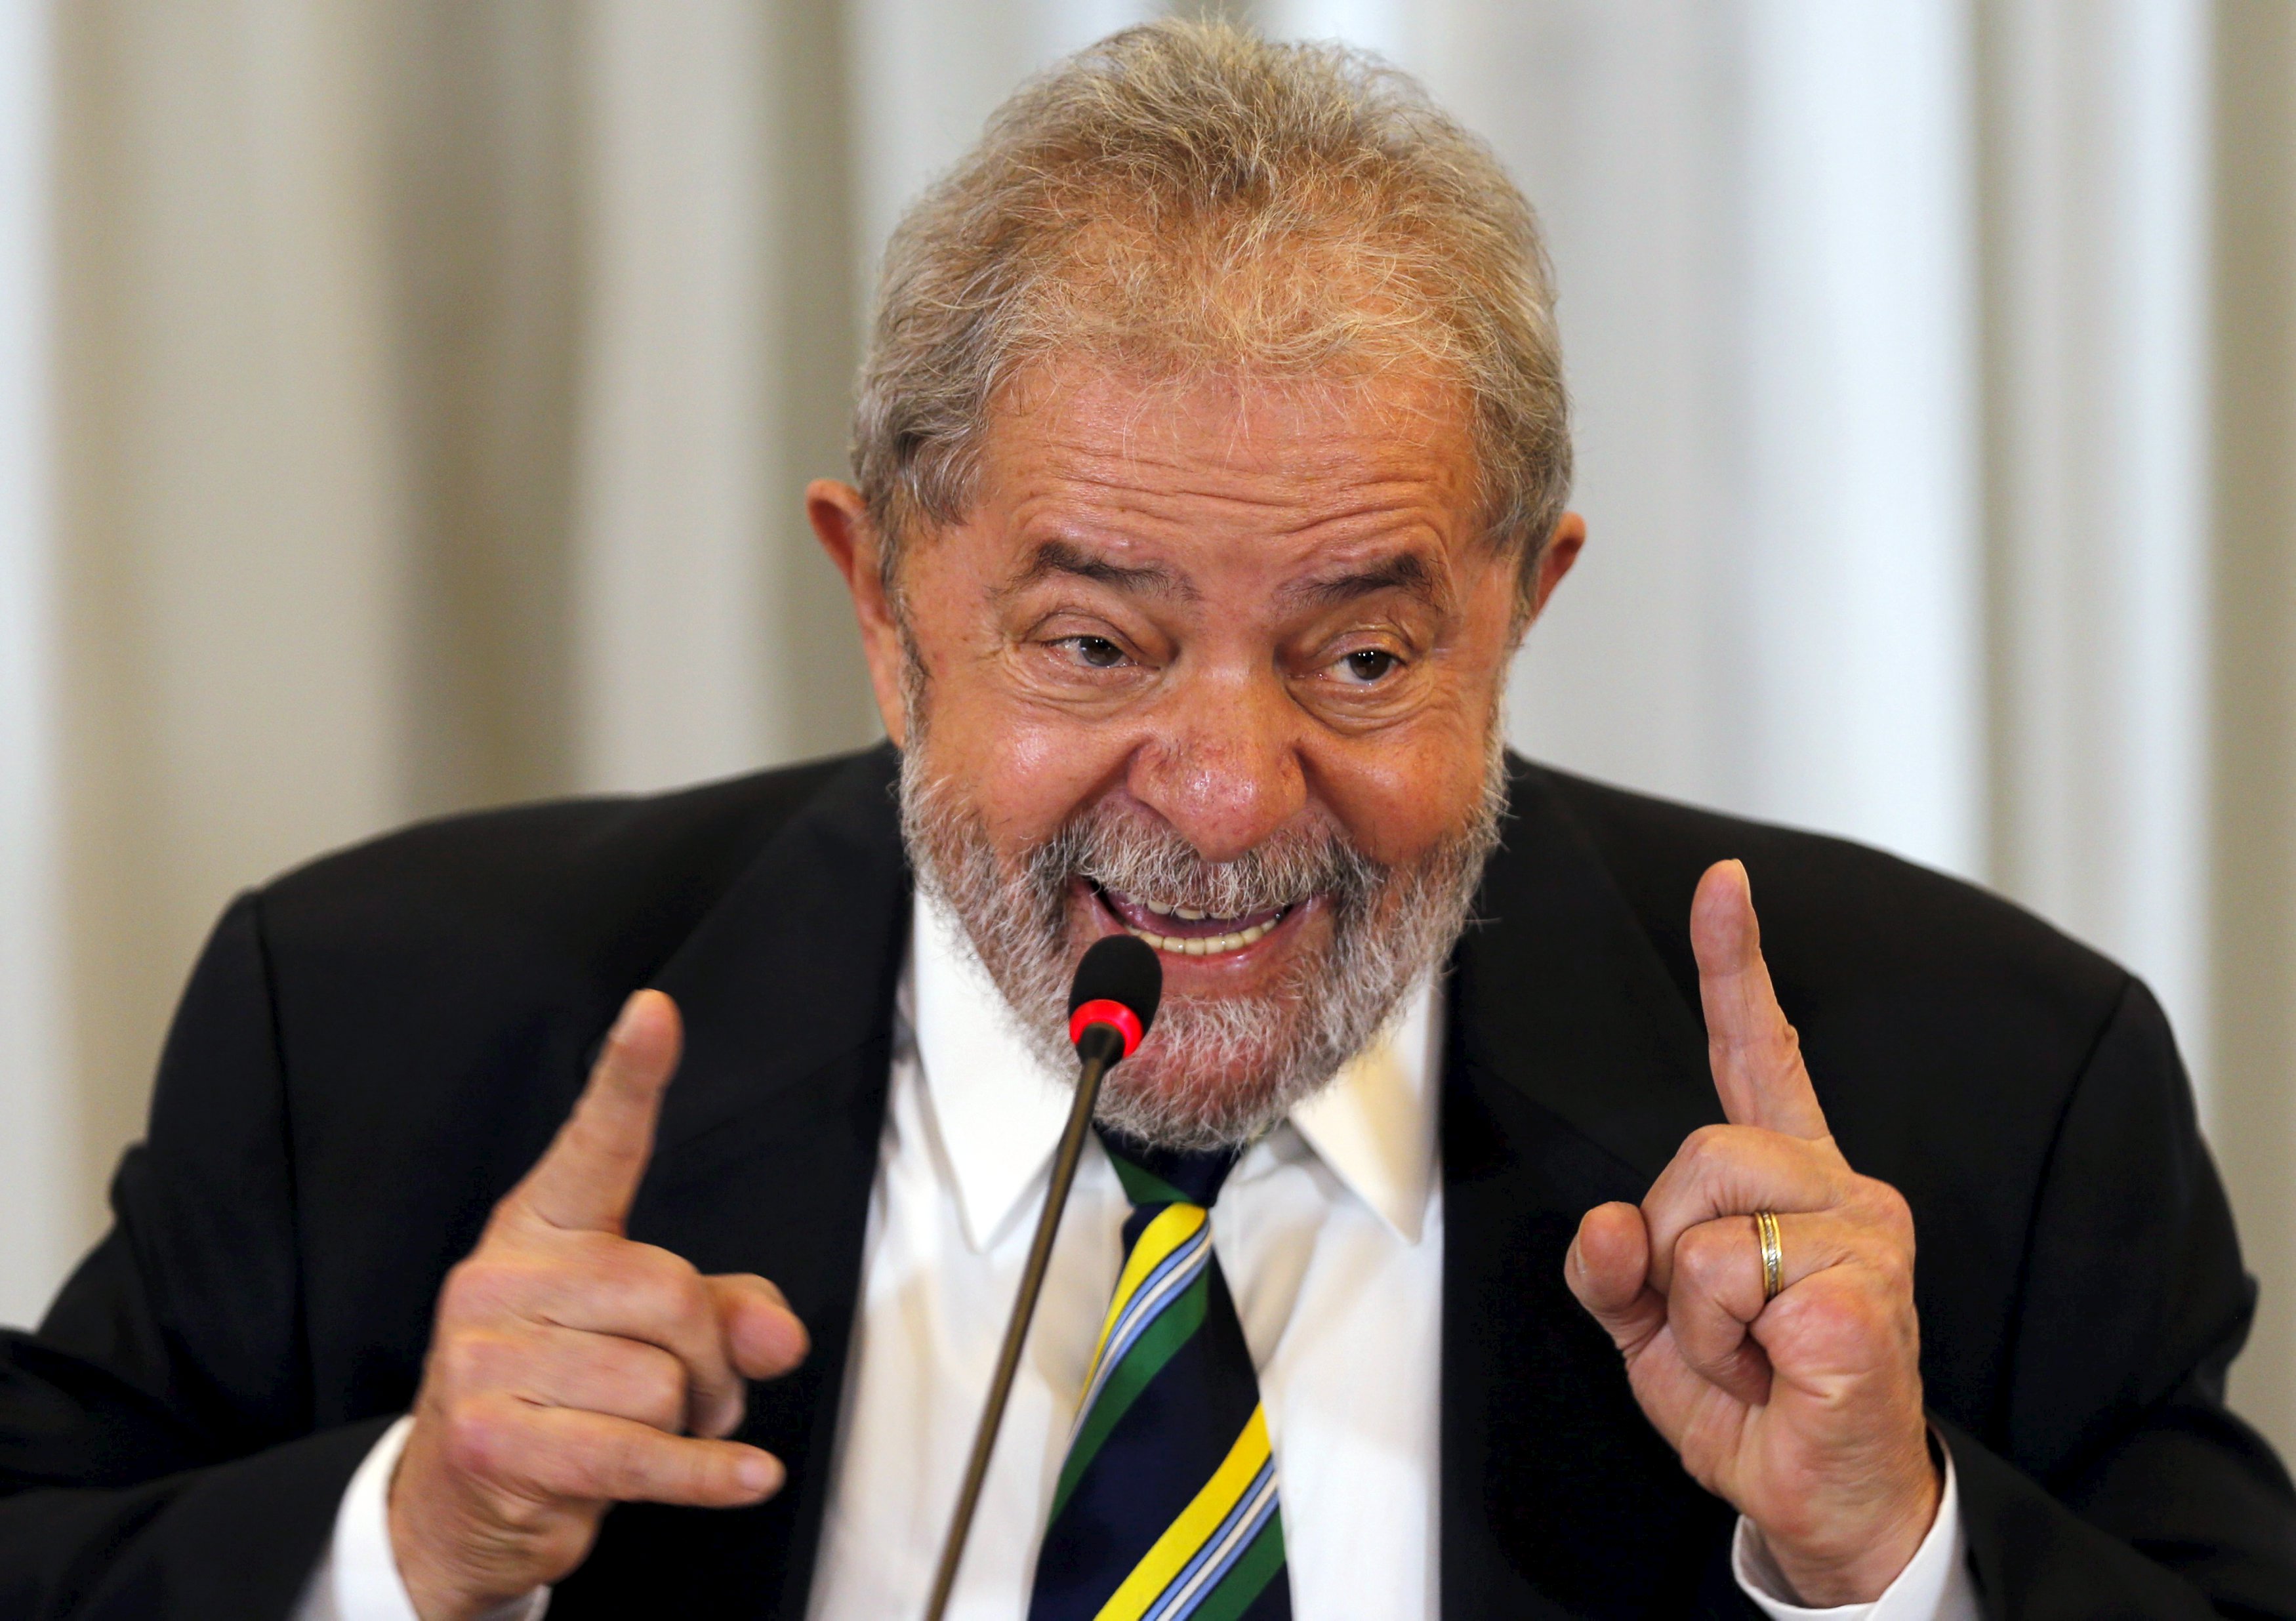 The former president of Brazil, Lula da Silva, speaks with international media during a press conference in Sao Paulo, Brazil, on March 28, 201